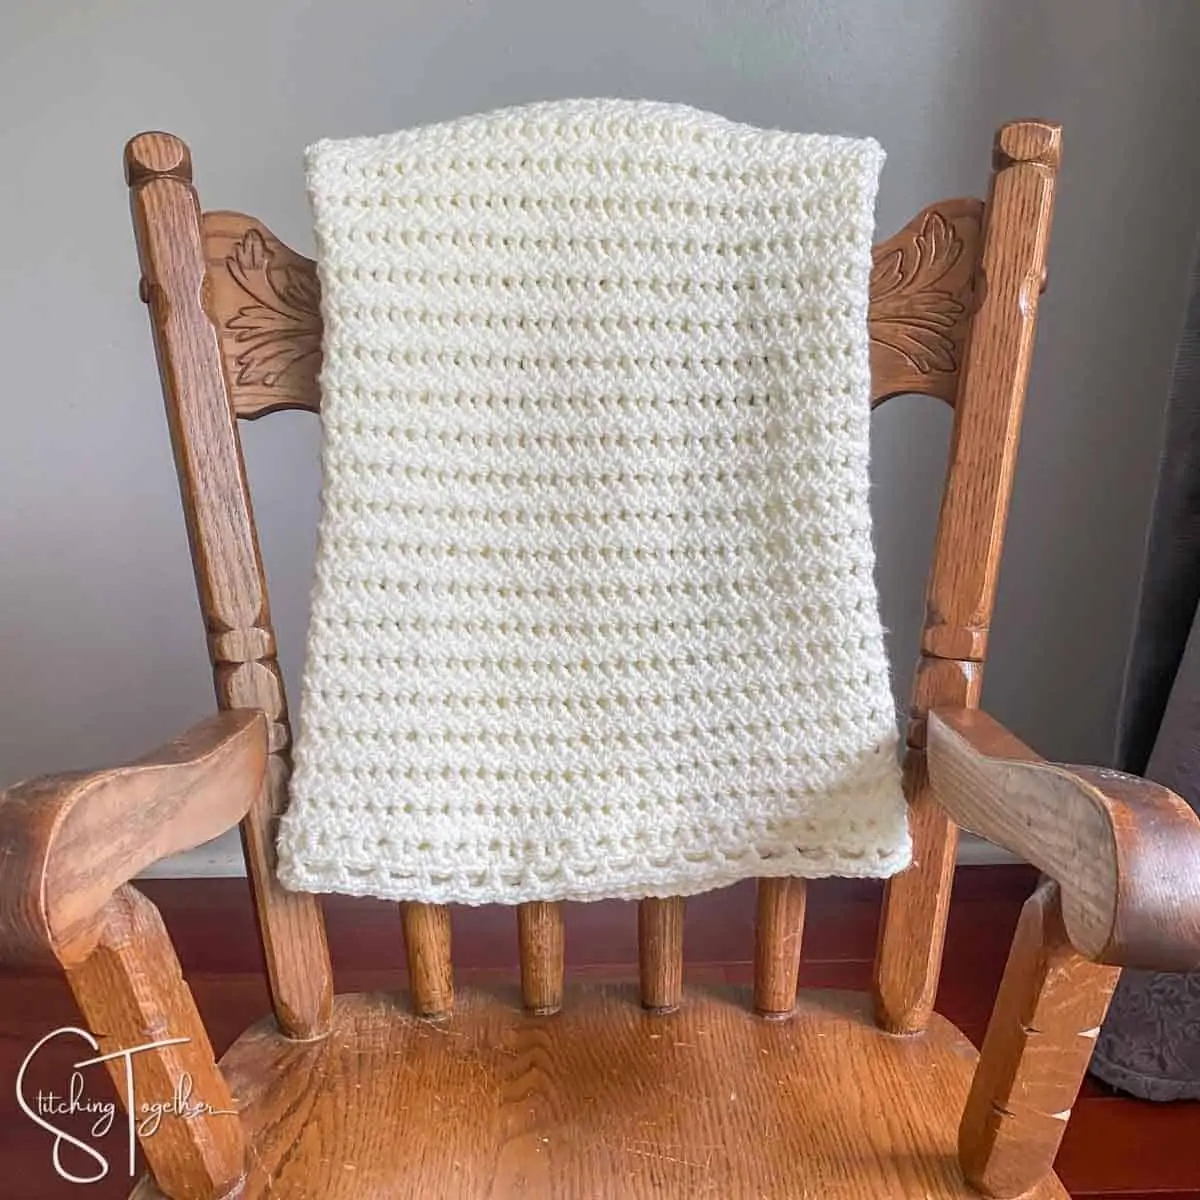 light and lacy crochet baby blanket draped over the back of a small rocking chair